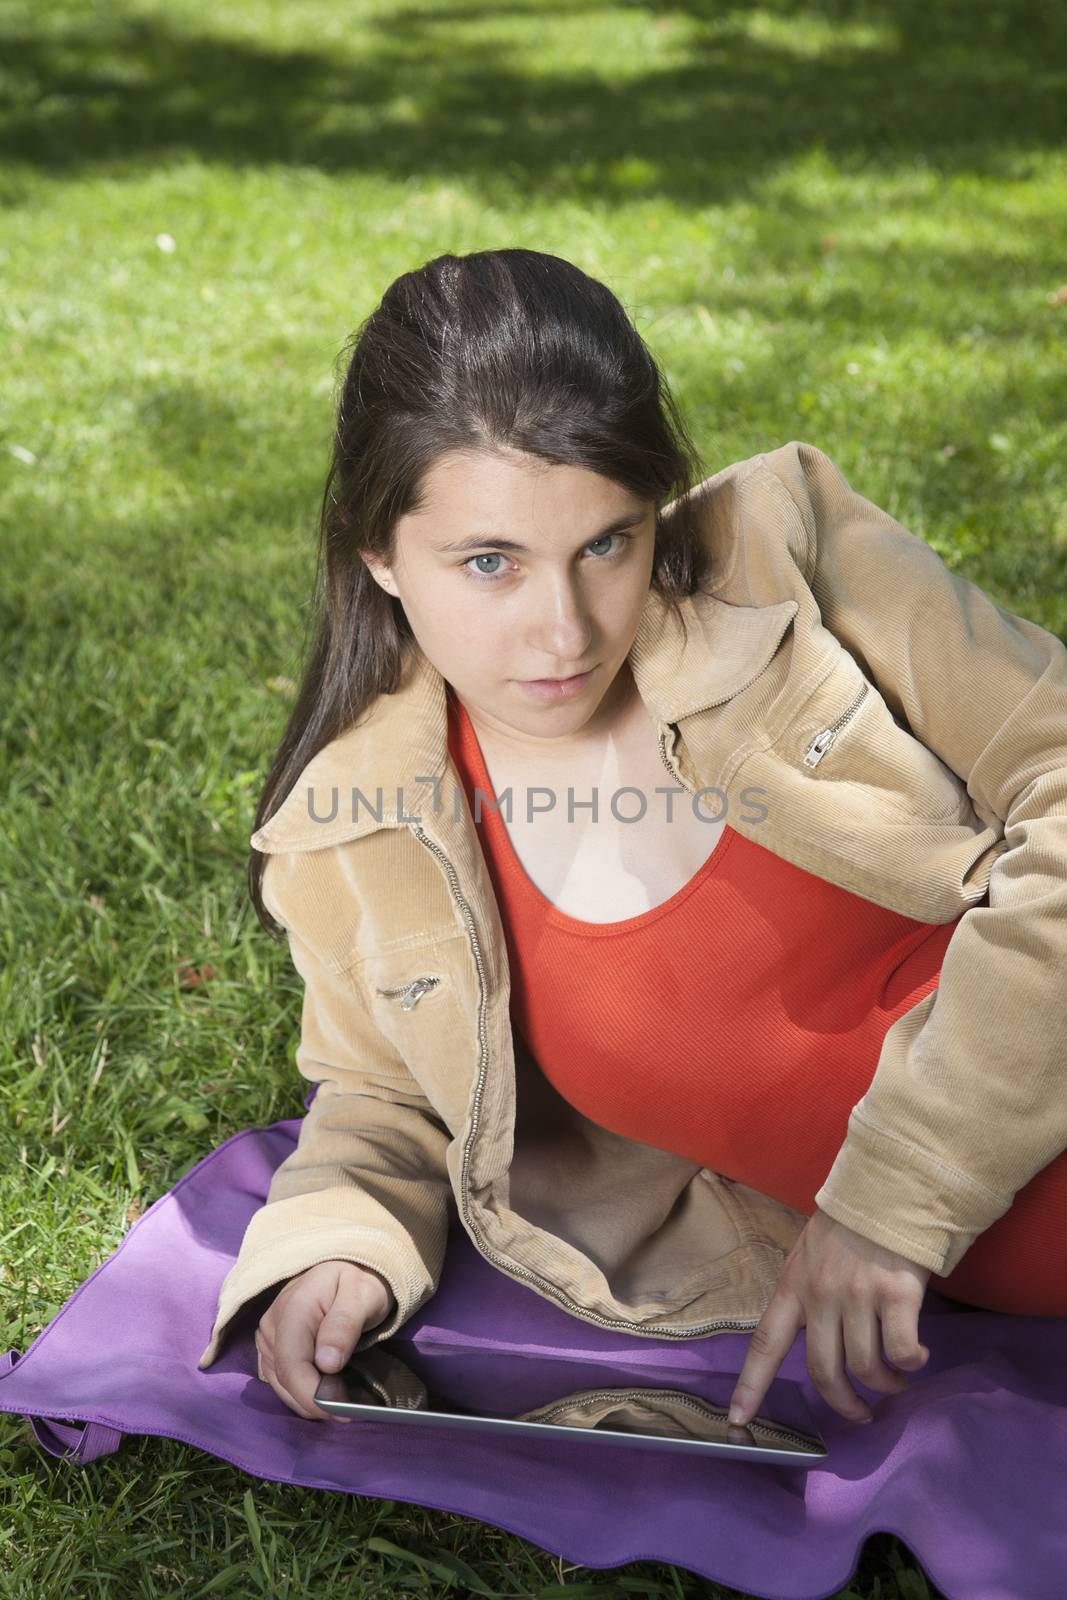 pregnant young woman with orange shirt touching tablet at a park in Madrid Spain Europe